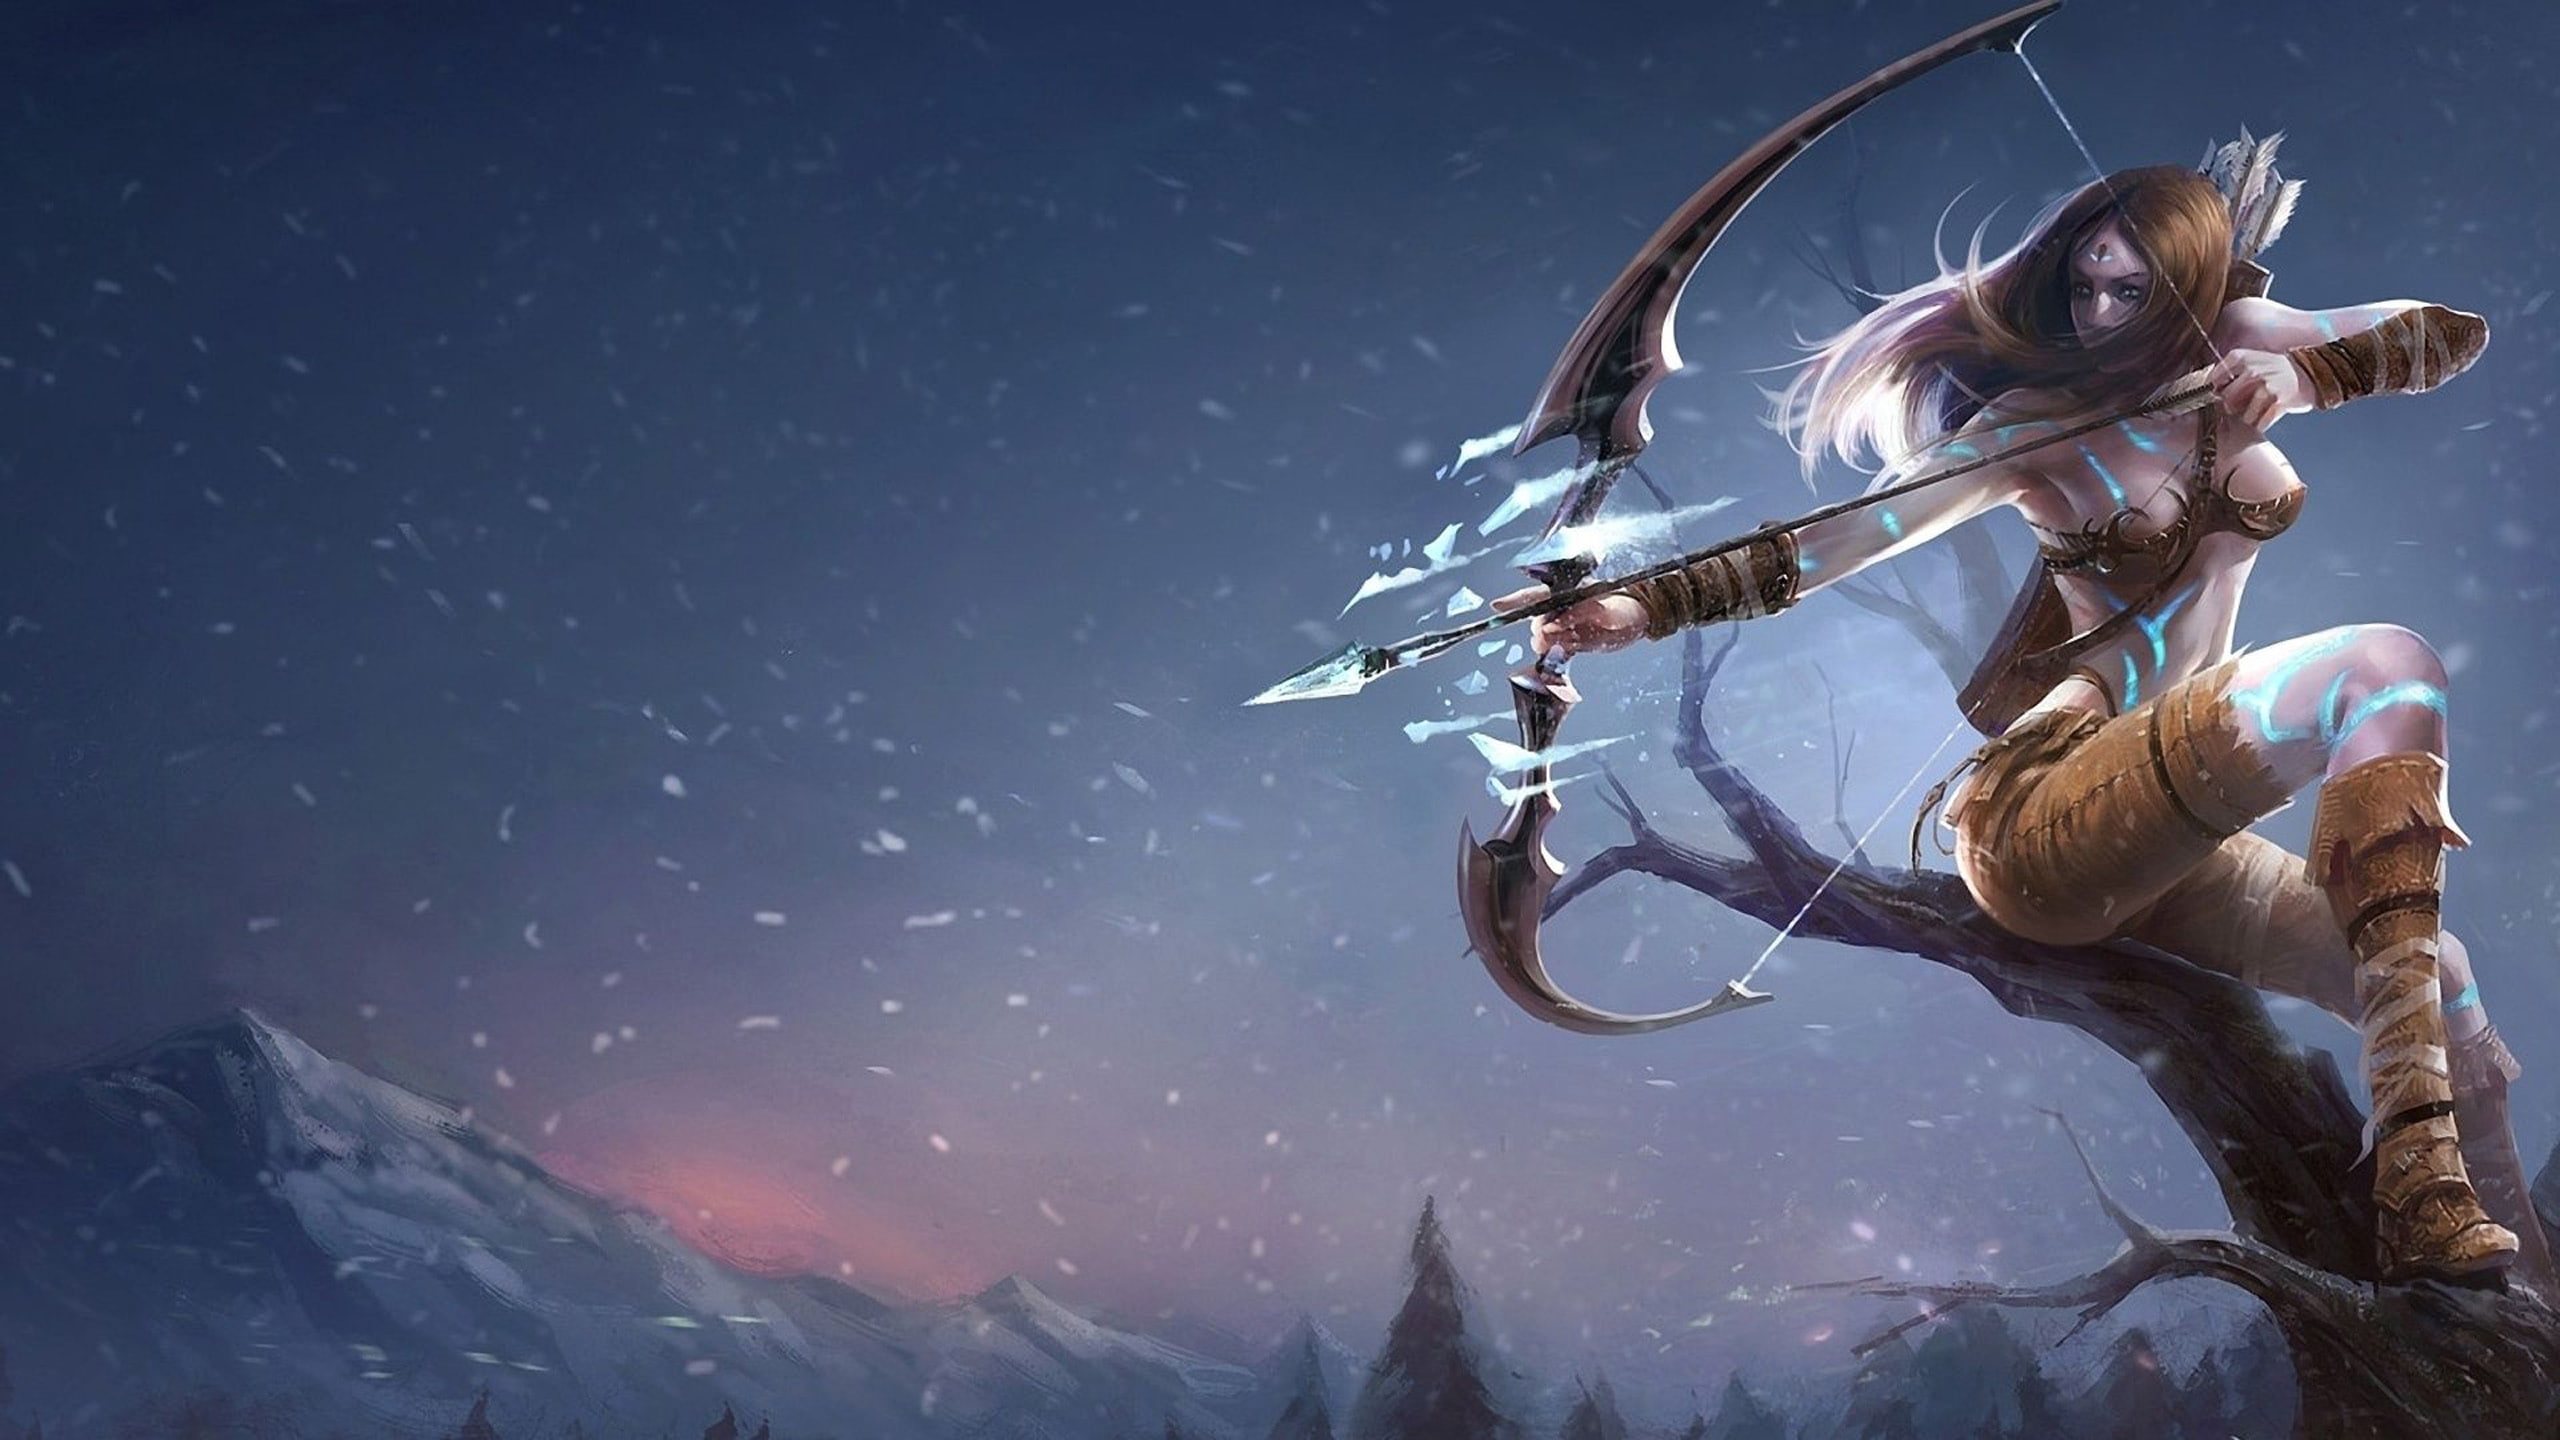 League of Legends Video Games Ashe Bow and Arrow Snow HD Wallpaper 2560×1440